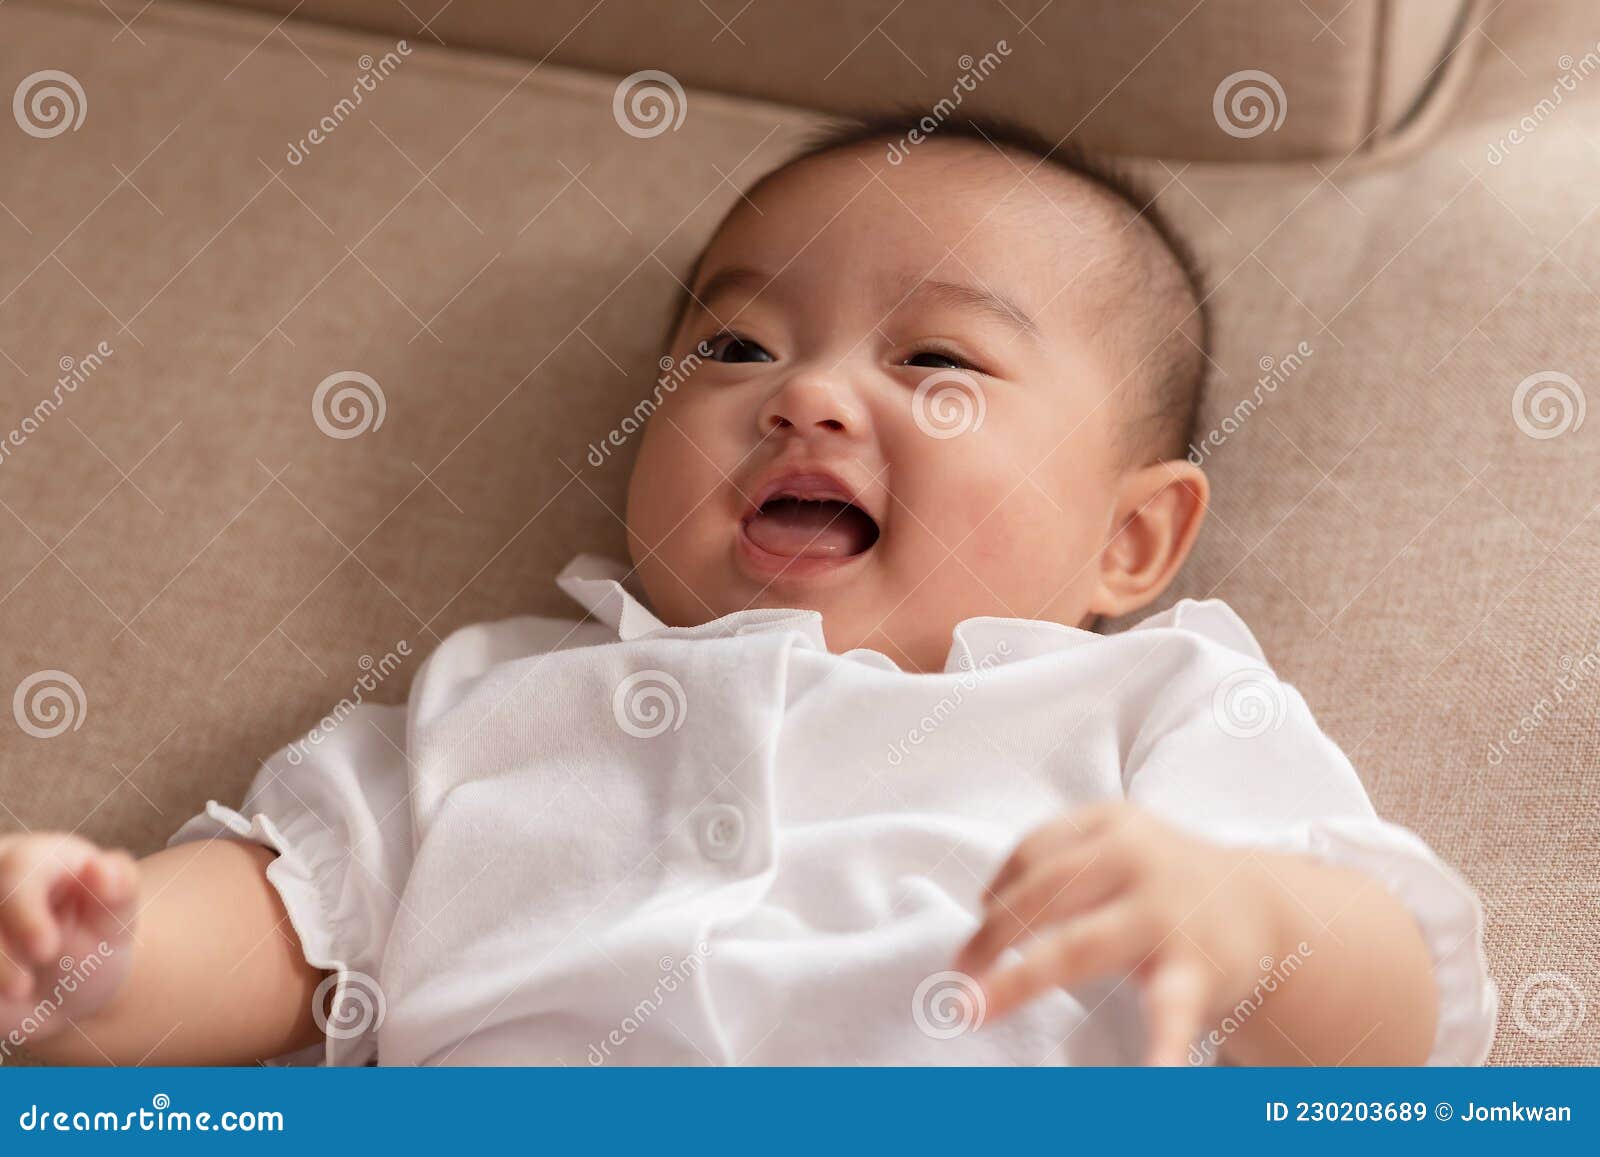 Adorable Asian Baby Girl Lying on Bed Looking at Camera.Cute ...